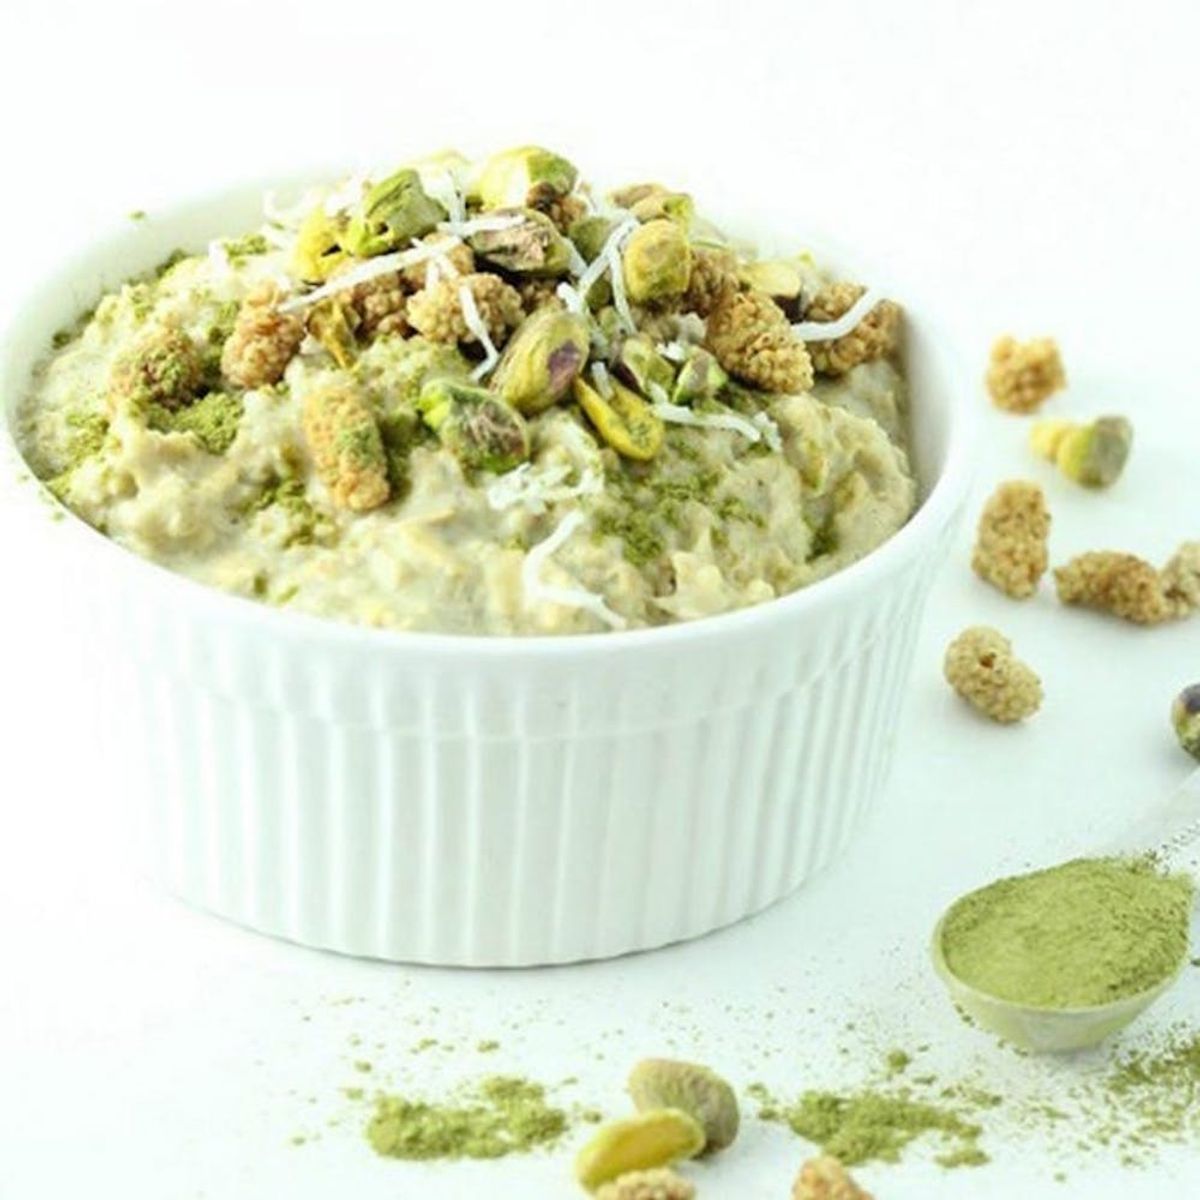 15 Moringa Recipes That Will Make You Want to Kickstart Your Healthy Eating